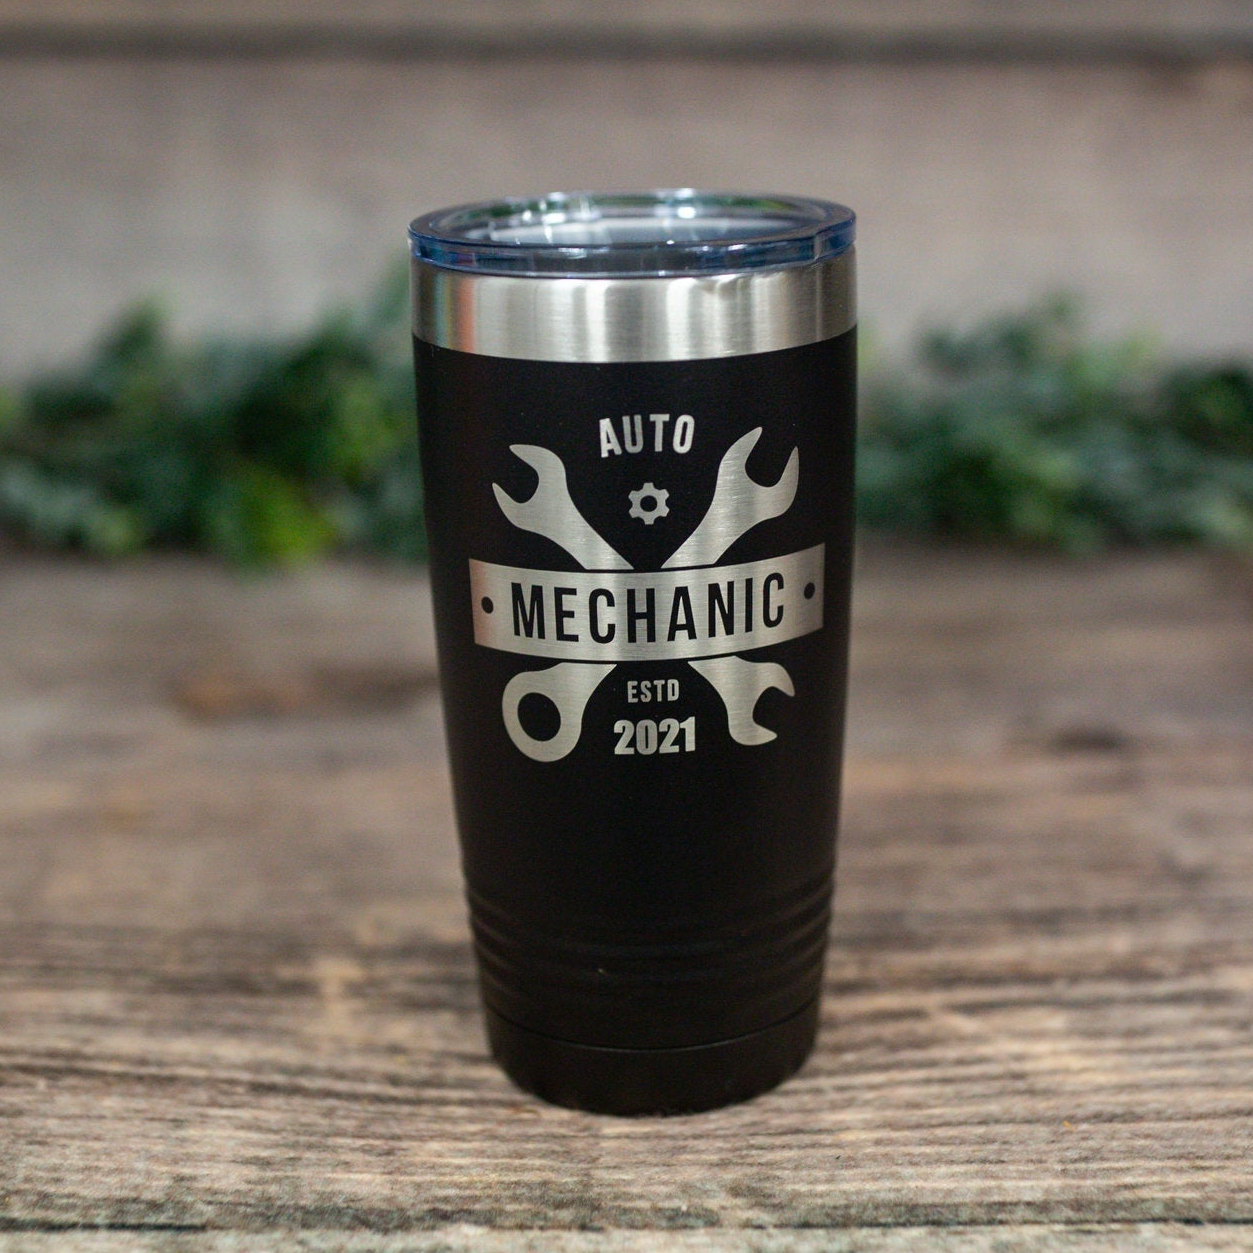 https://3cetching.com/wp-content/uploads/2021/07/auto-mechanic-engraved-stainless-steel-mechanic-tumbler-auto-mechanic-gift-mug-mug-for-mechanics-60f76322.jpg